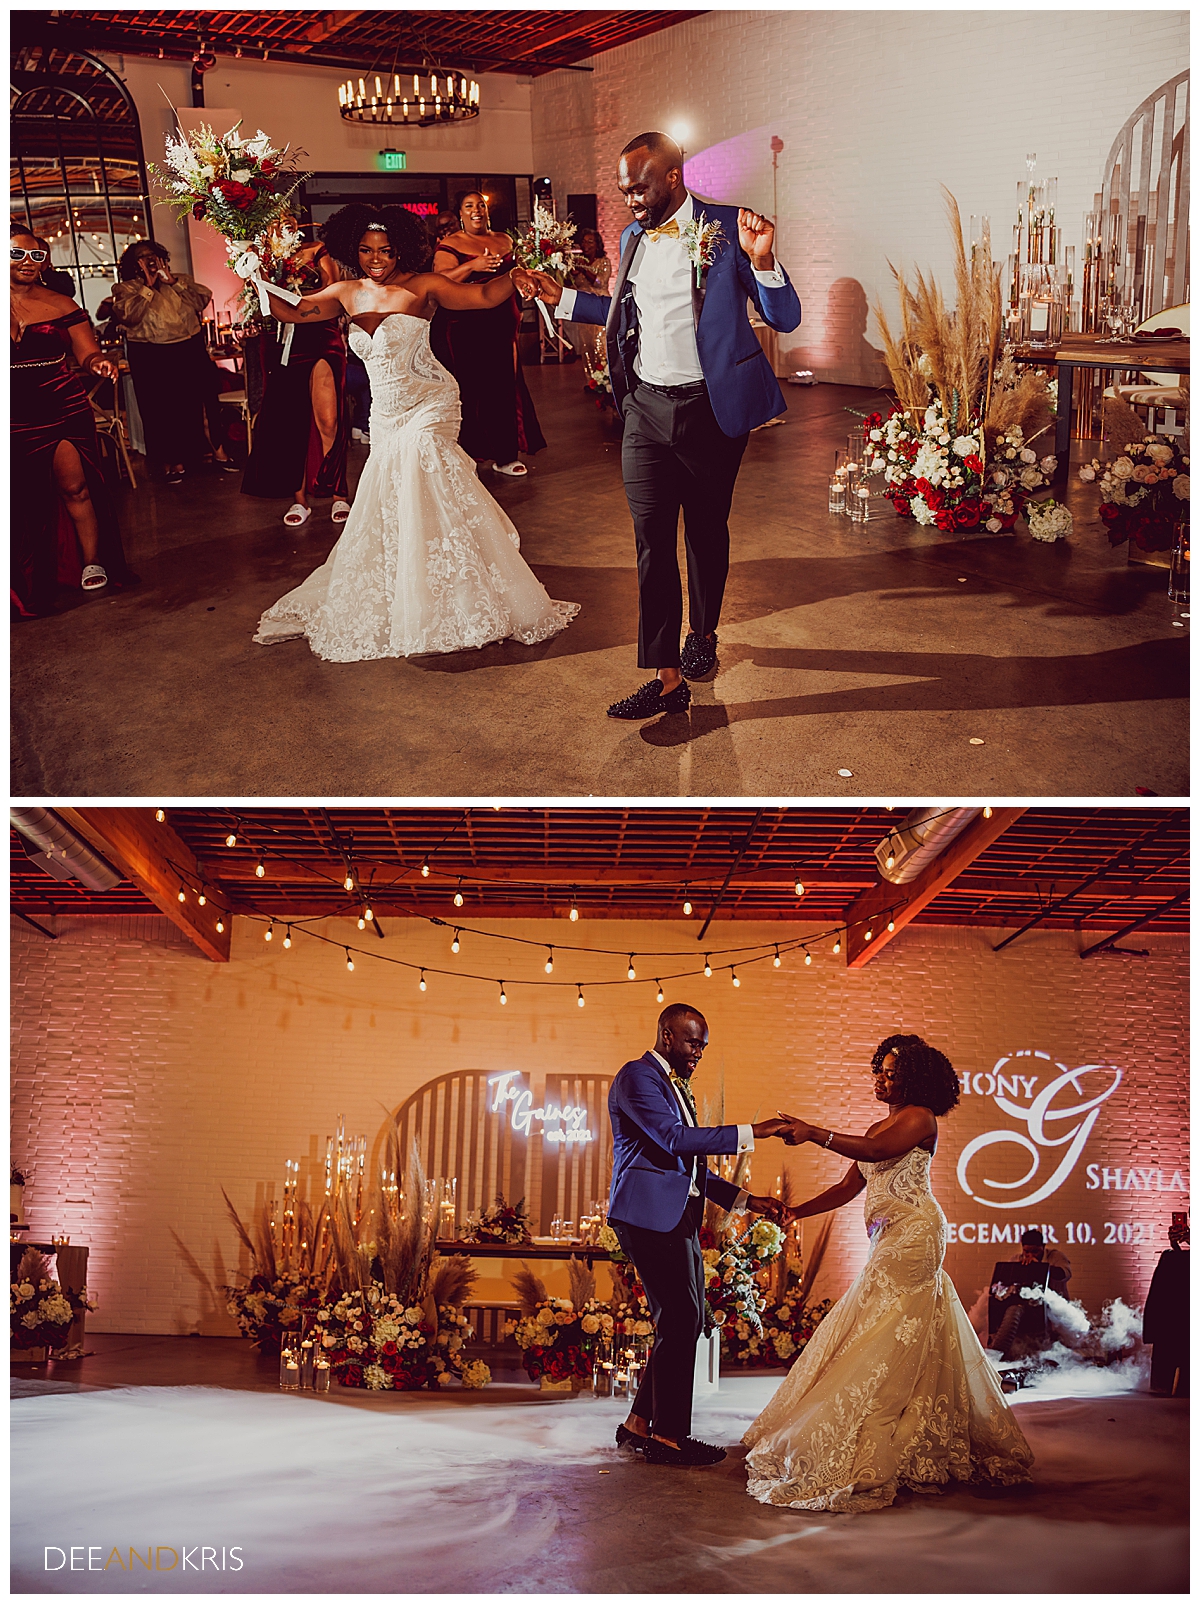 Two images: Top image of bride and groom making their grand entrance. Bottom image of bride and groom dancing under market lights.